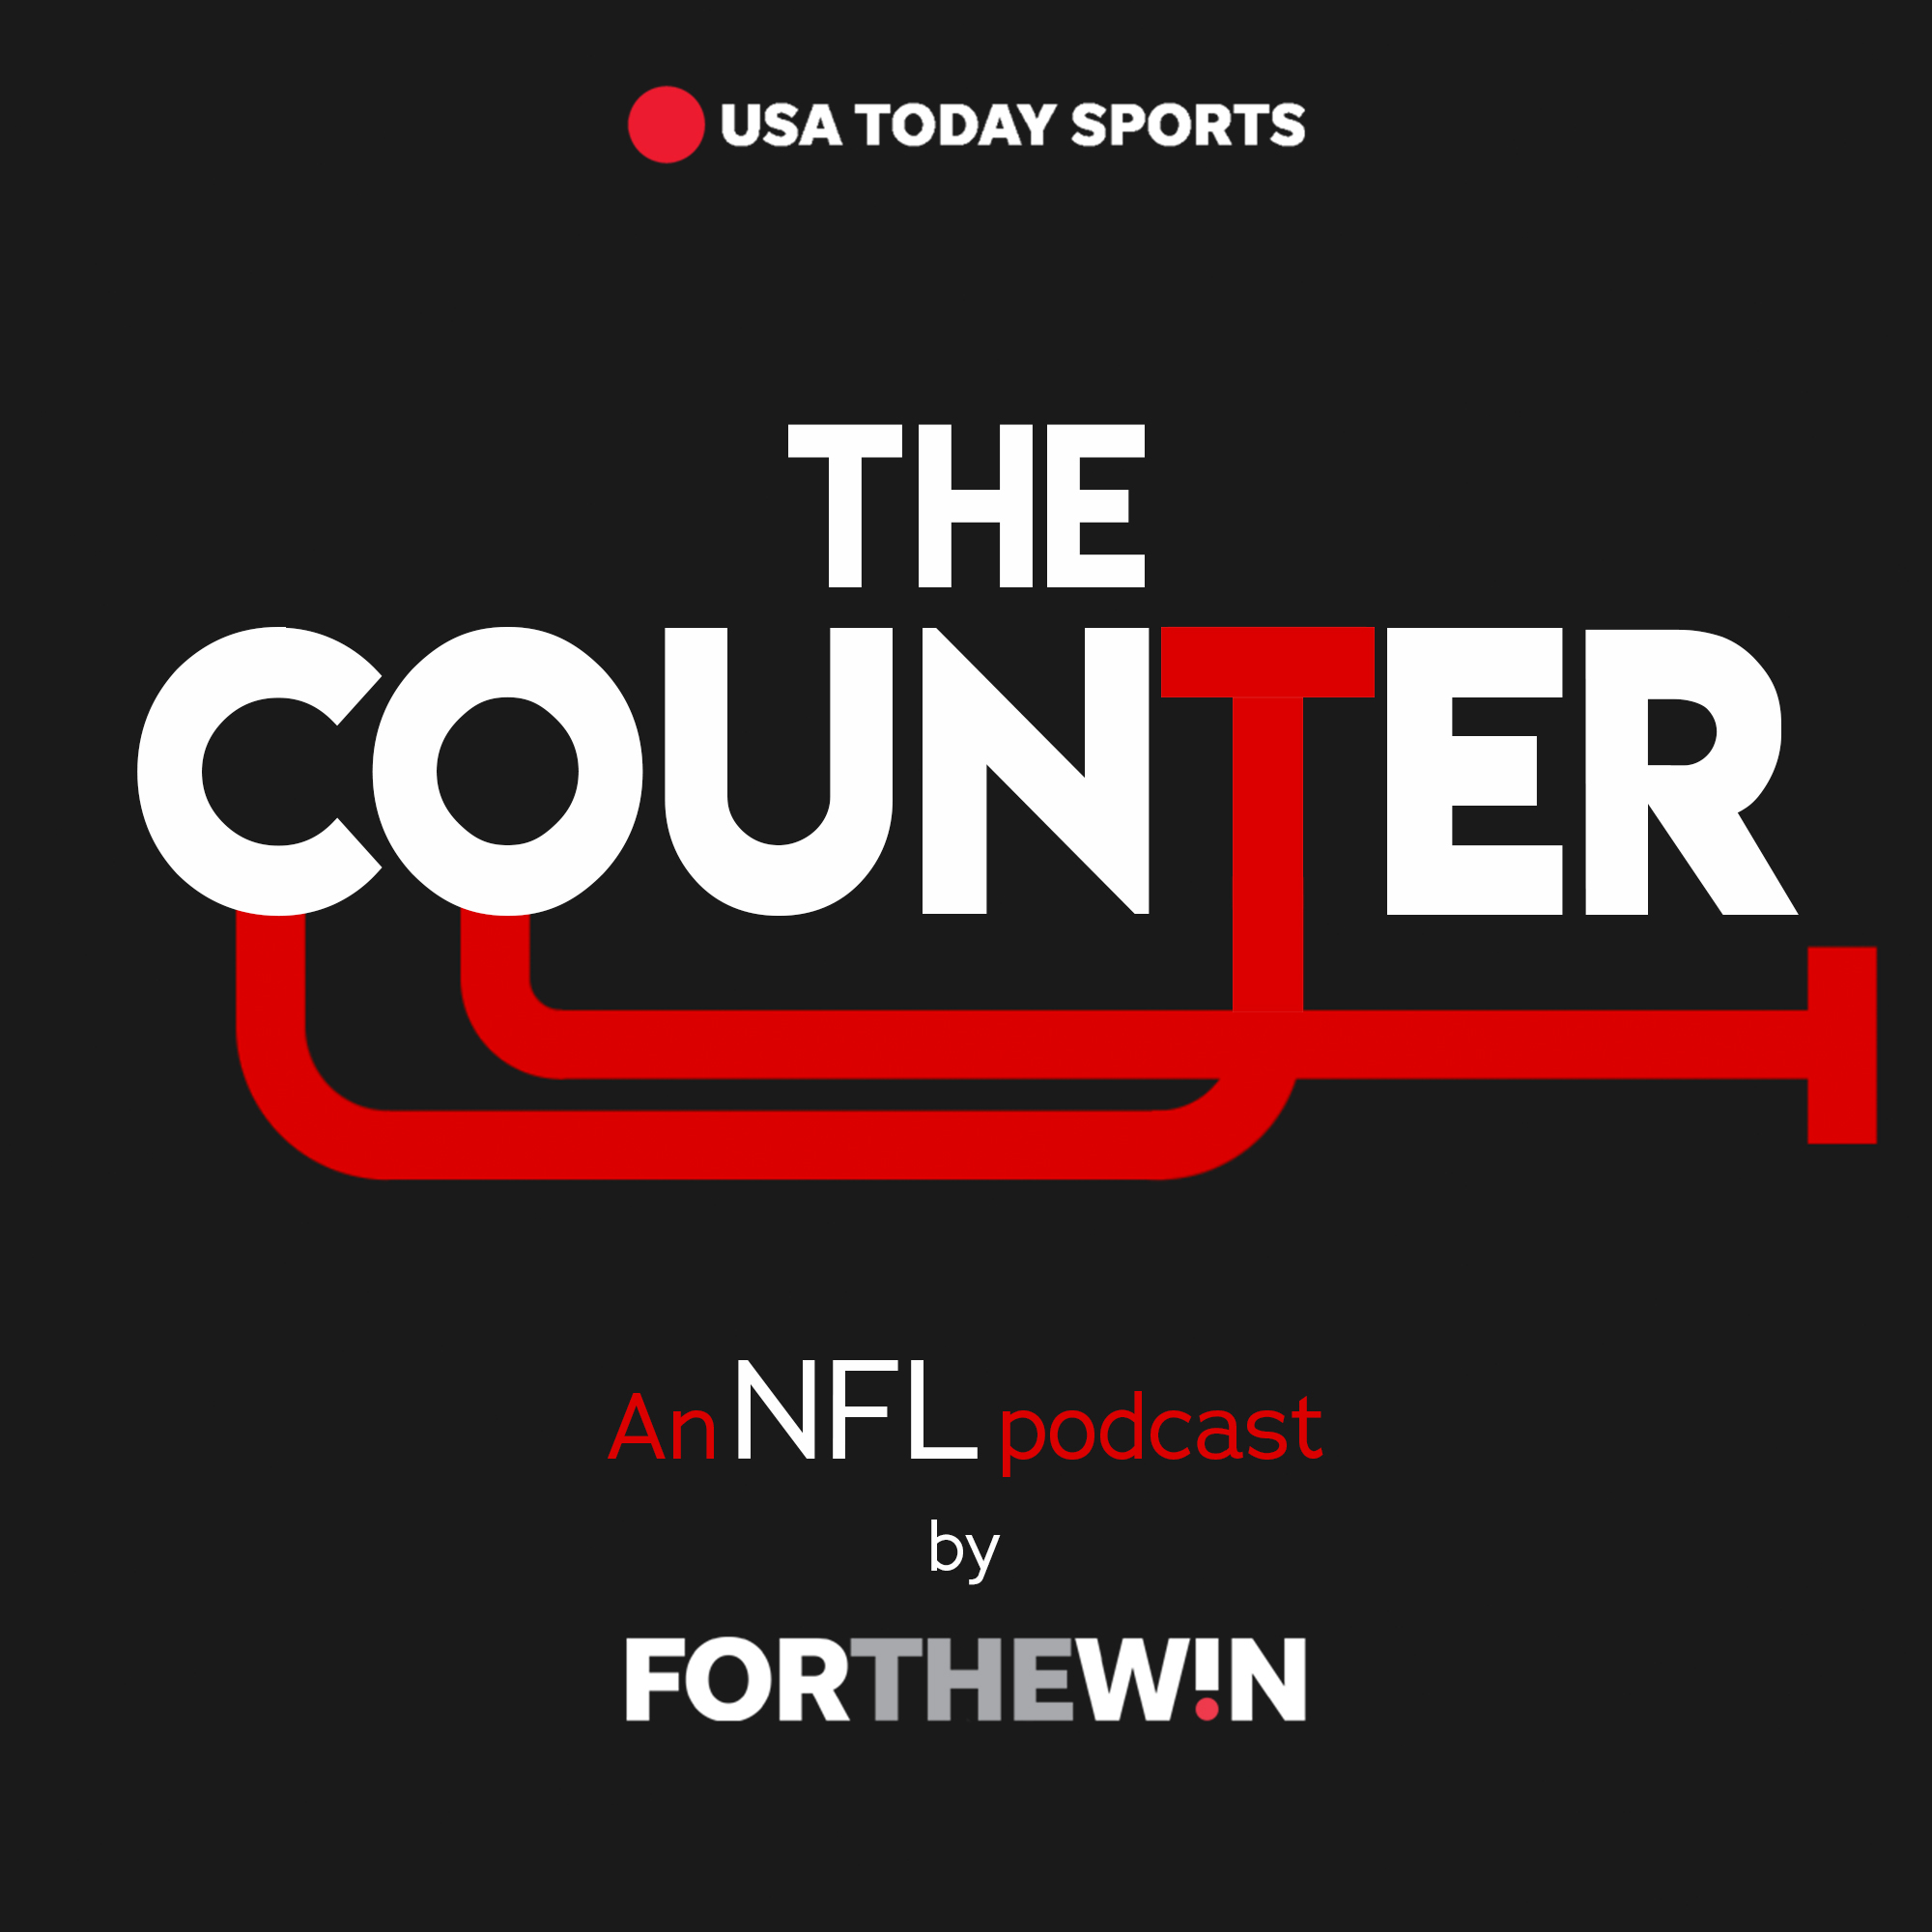 The Counter: An NFL Podcast by For The Win - Richard Johnson, of the Split Zone Duo Podcast and SEC Network’s ‘Thinking Out Loud,’ talks about his Jaguars and Trevor Lawrence's imminent arrival